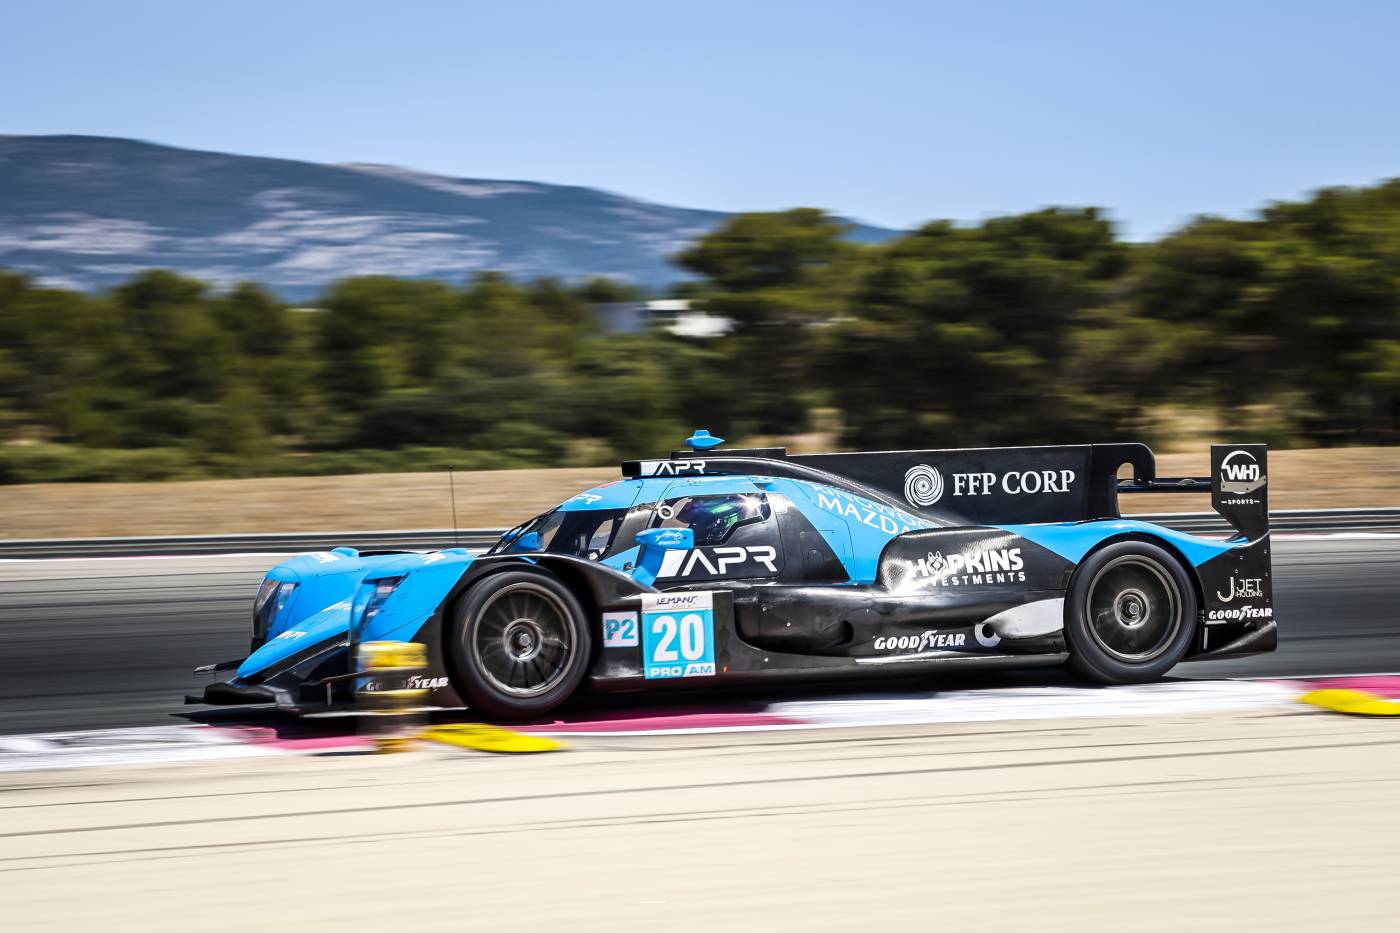 First ELMS win for Algarve Pro Racing Team